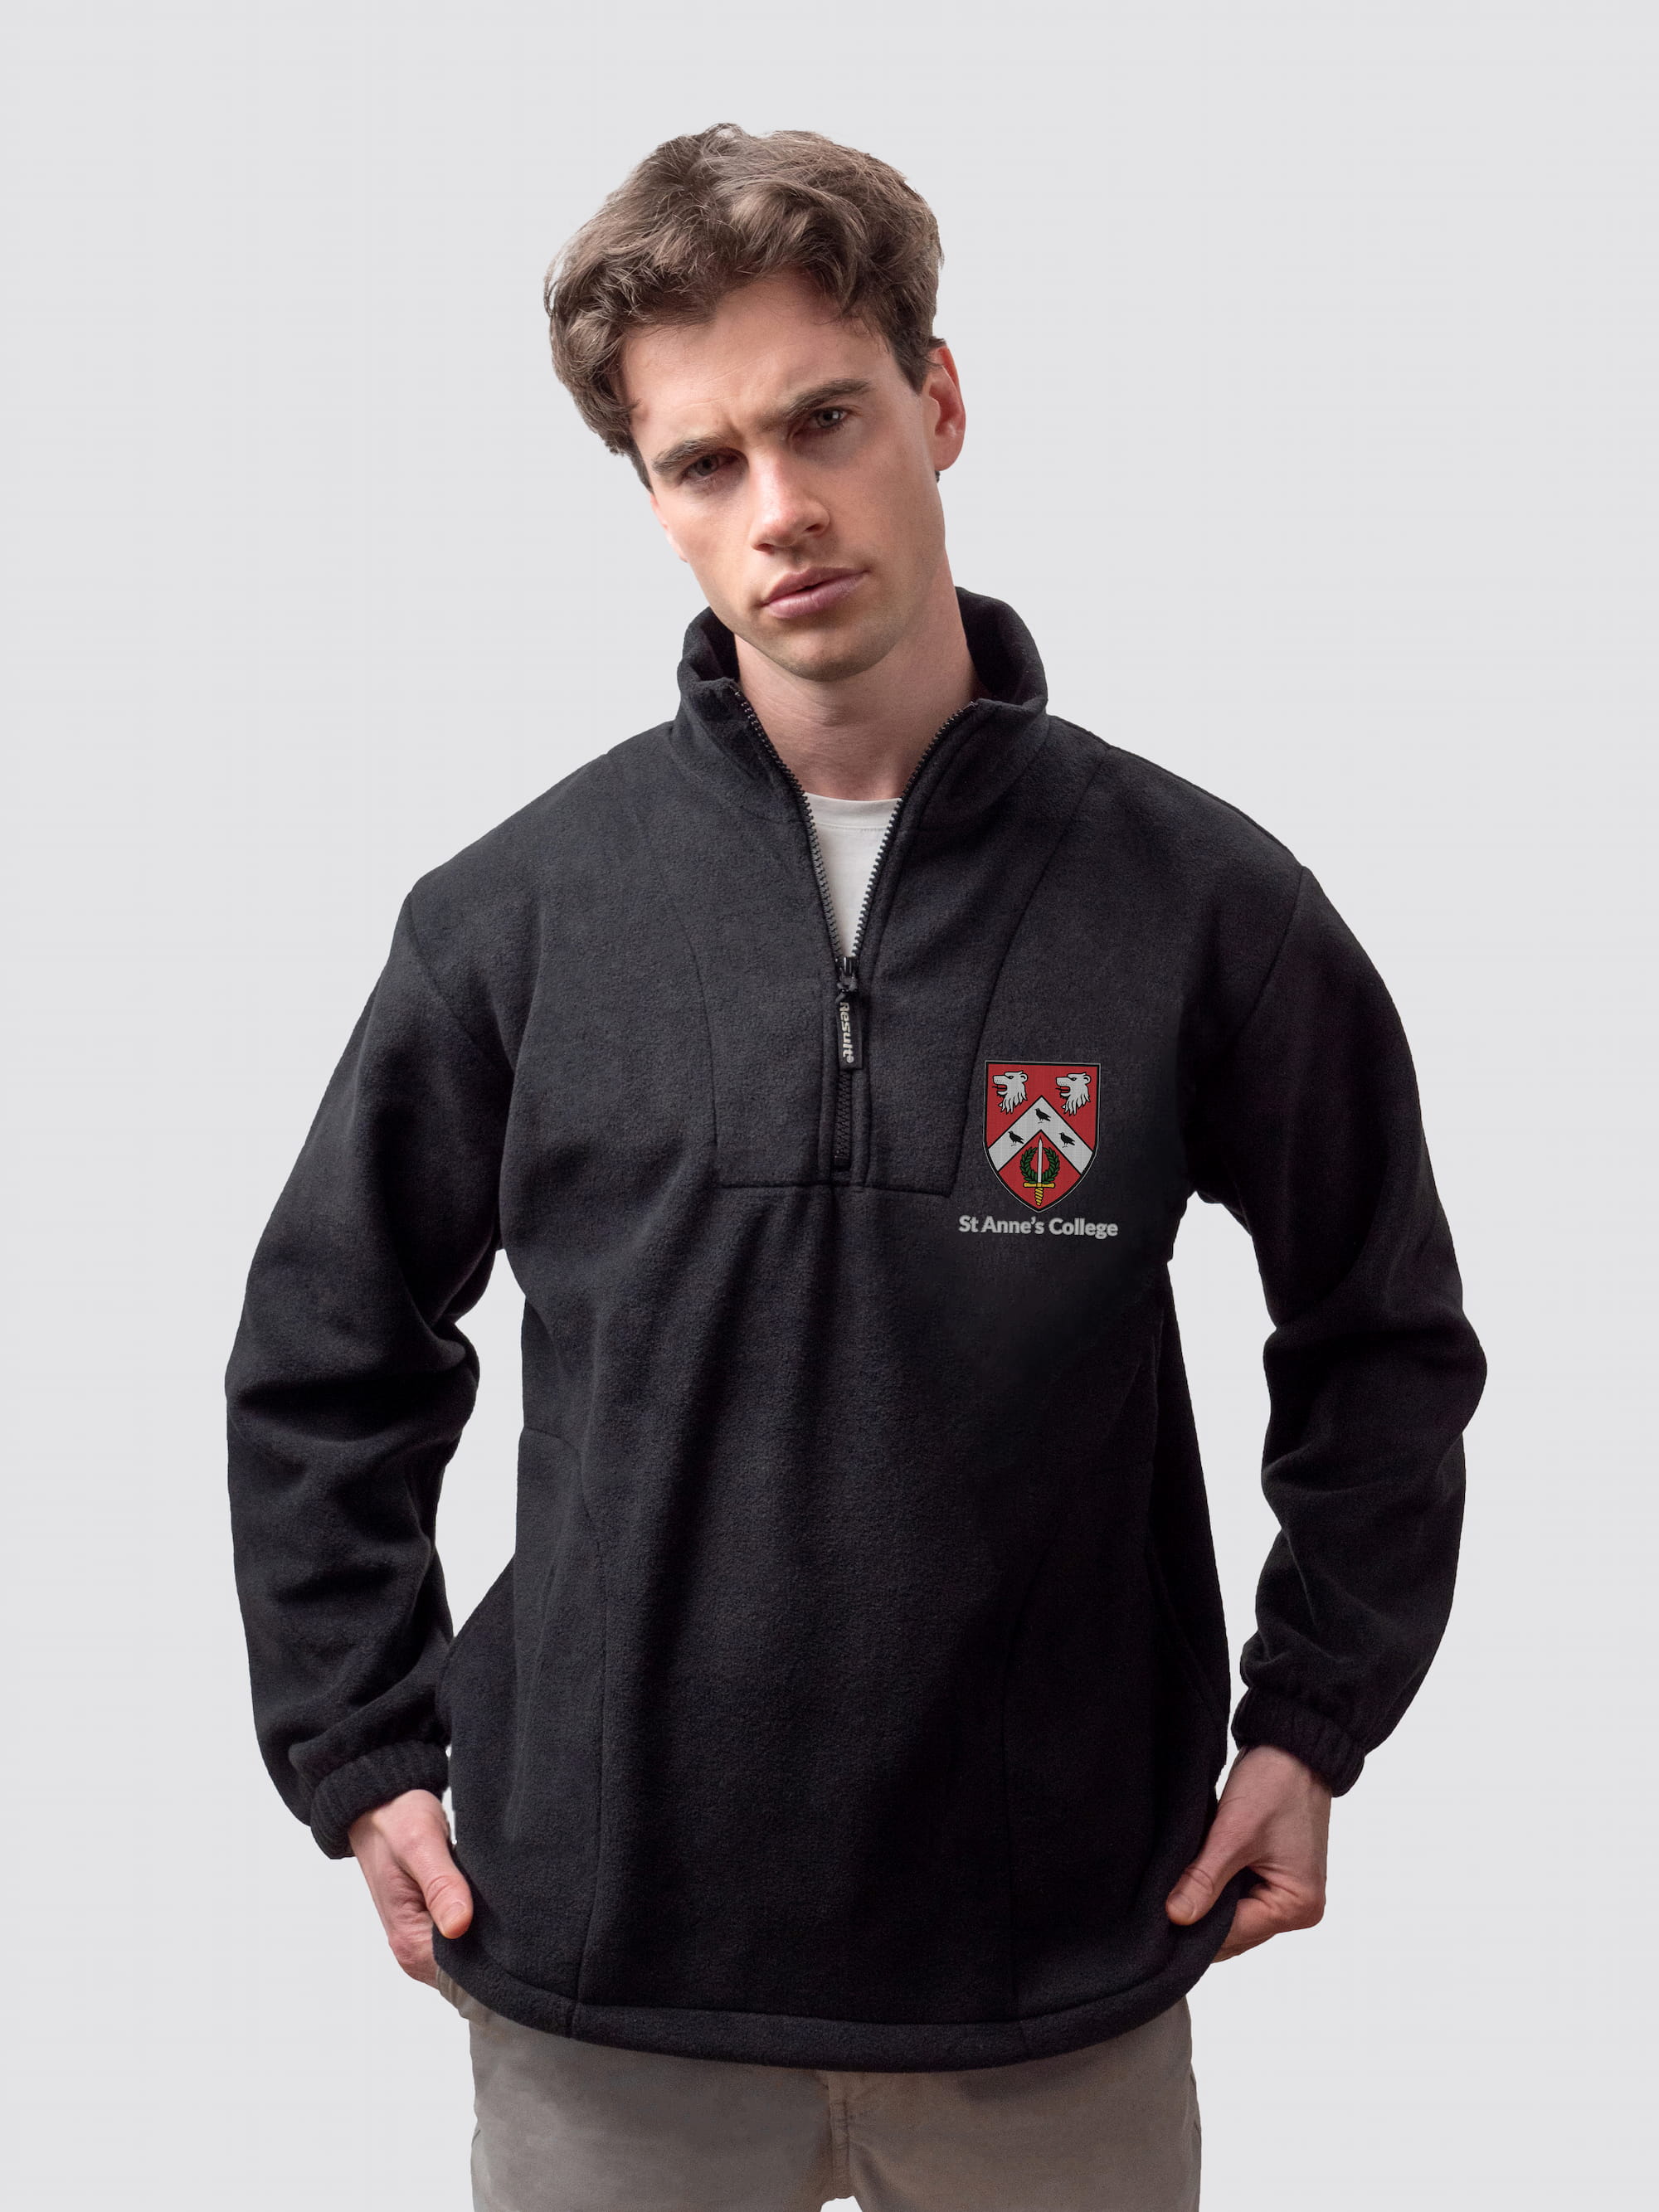 Oxford university fleece, with custom embroidered initials and St Anne's crest